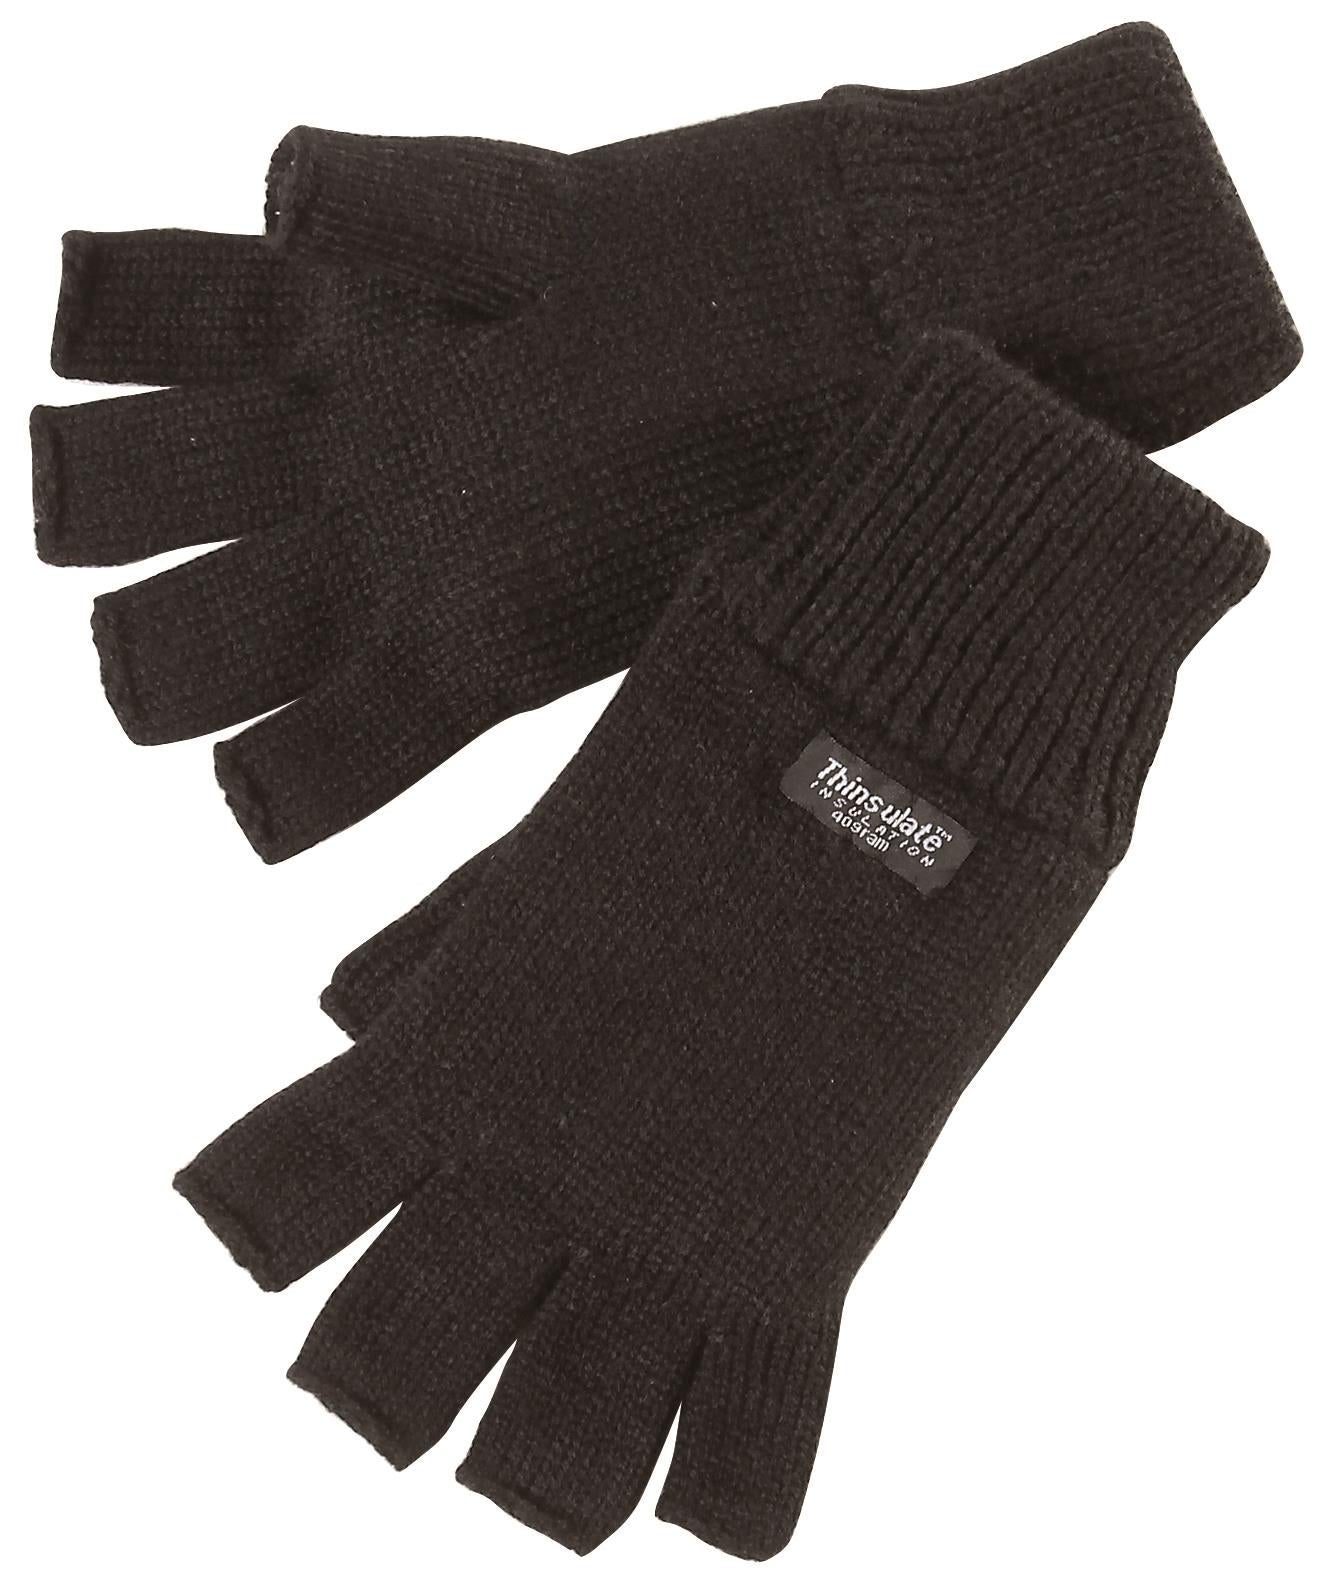 Fort Thinsulate thermal-lined fingerless black knitted winter glove #603